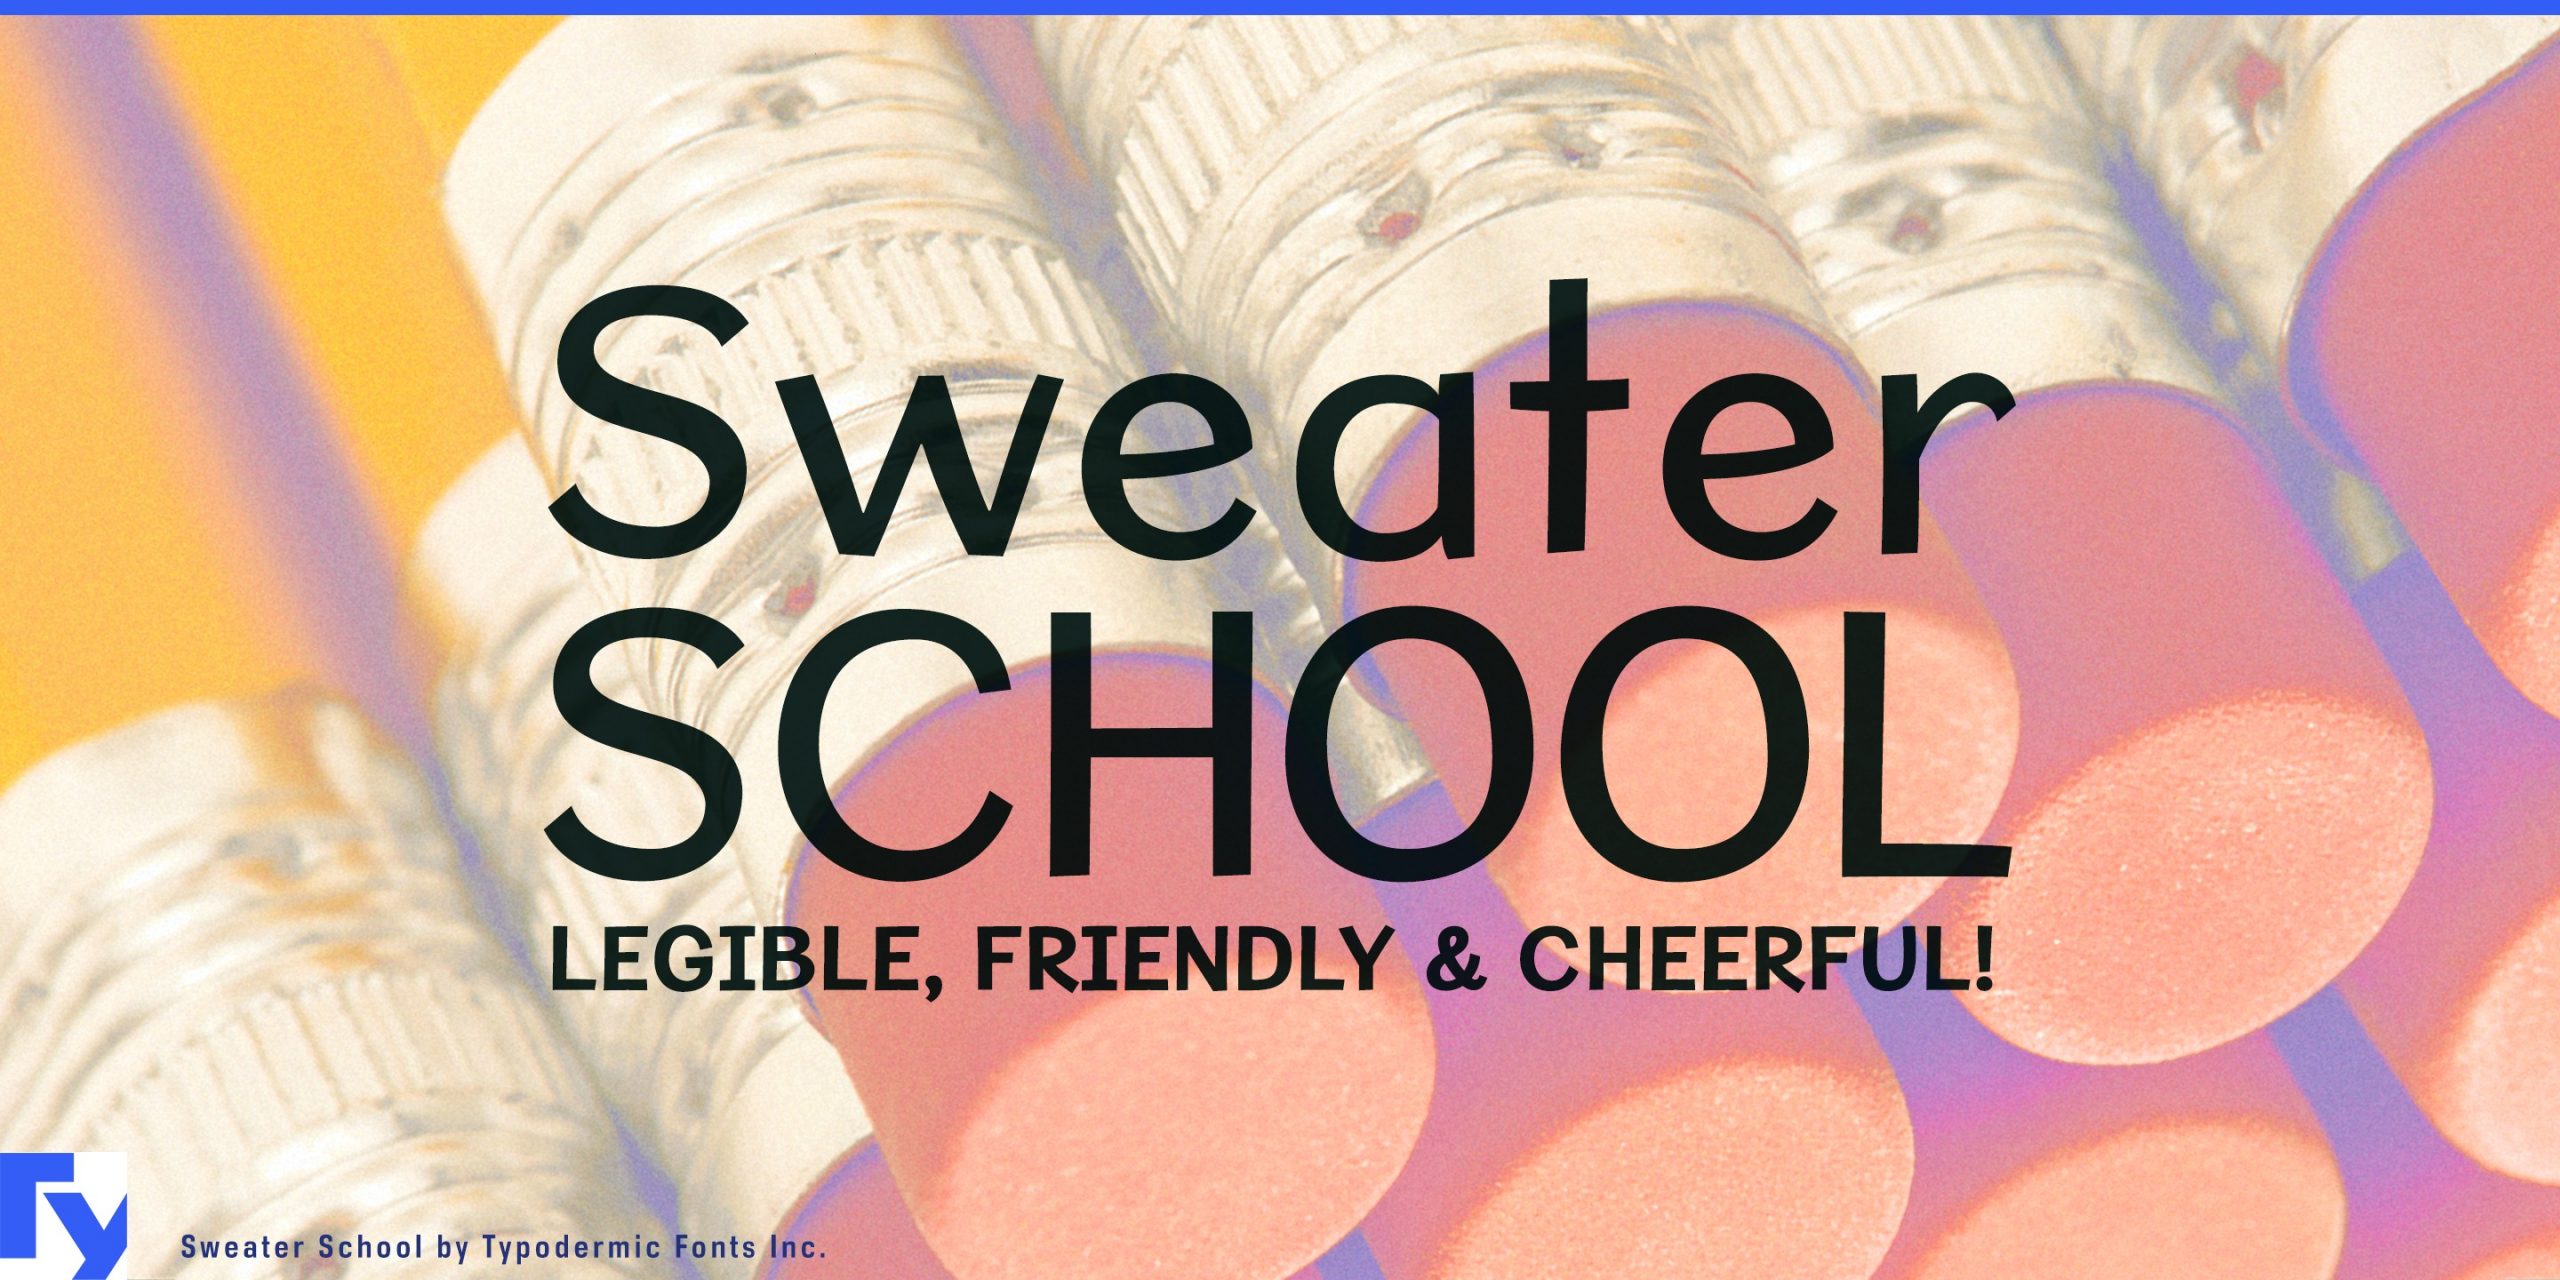 Discover the improved readability of Sweater School, inspired by elementary school teachers' print style.